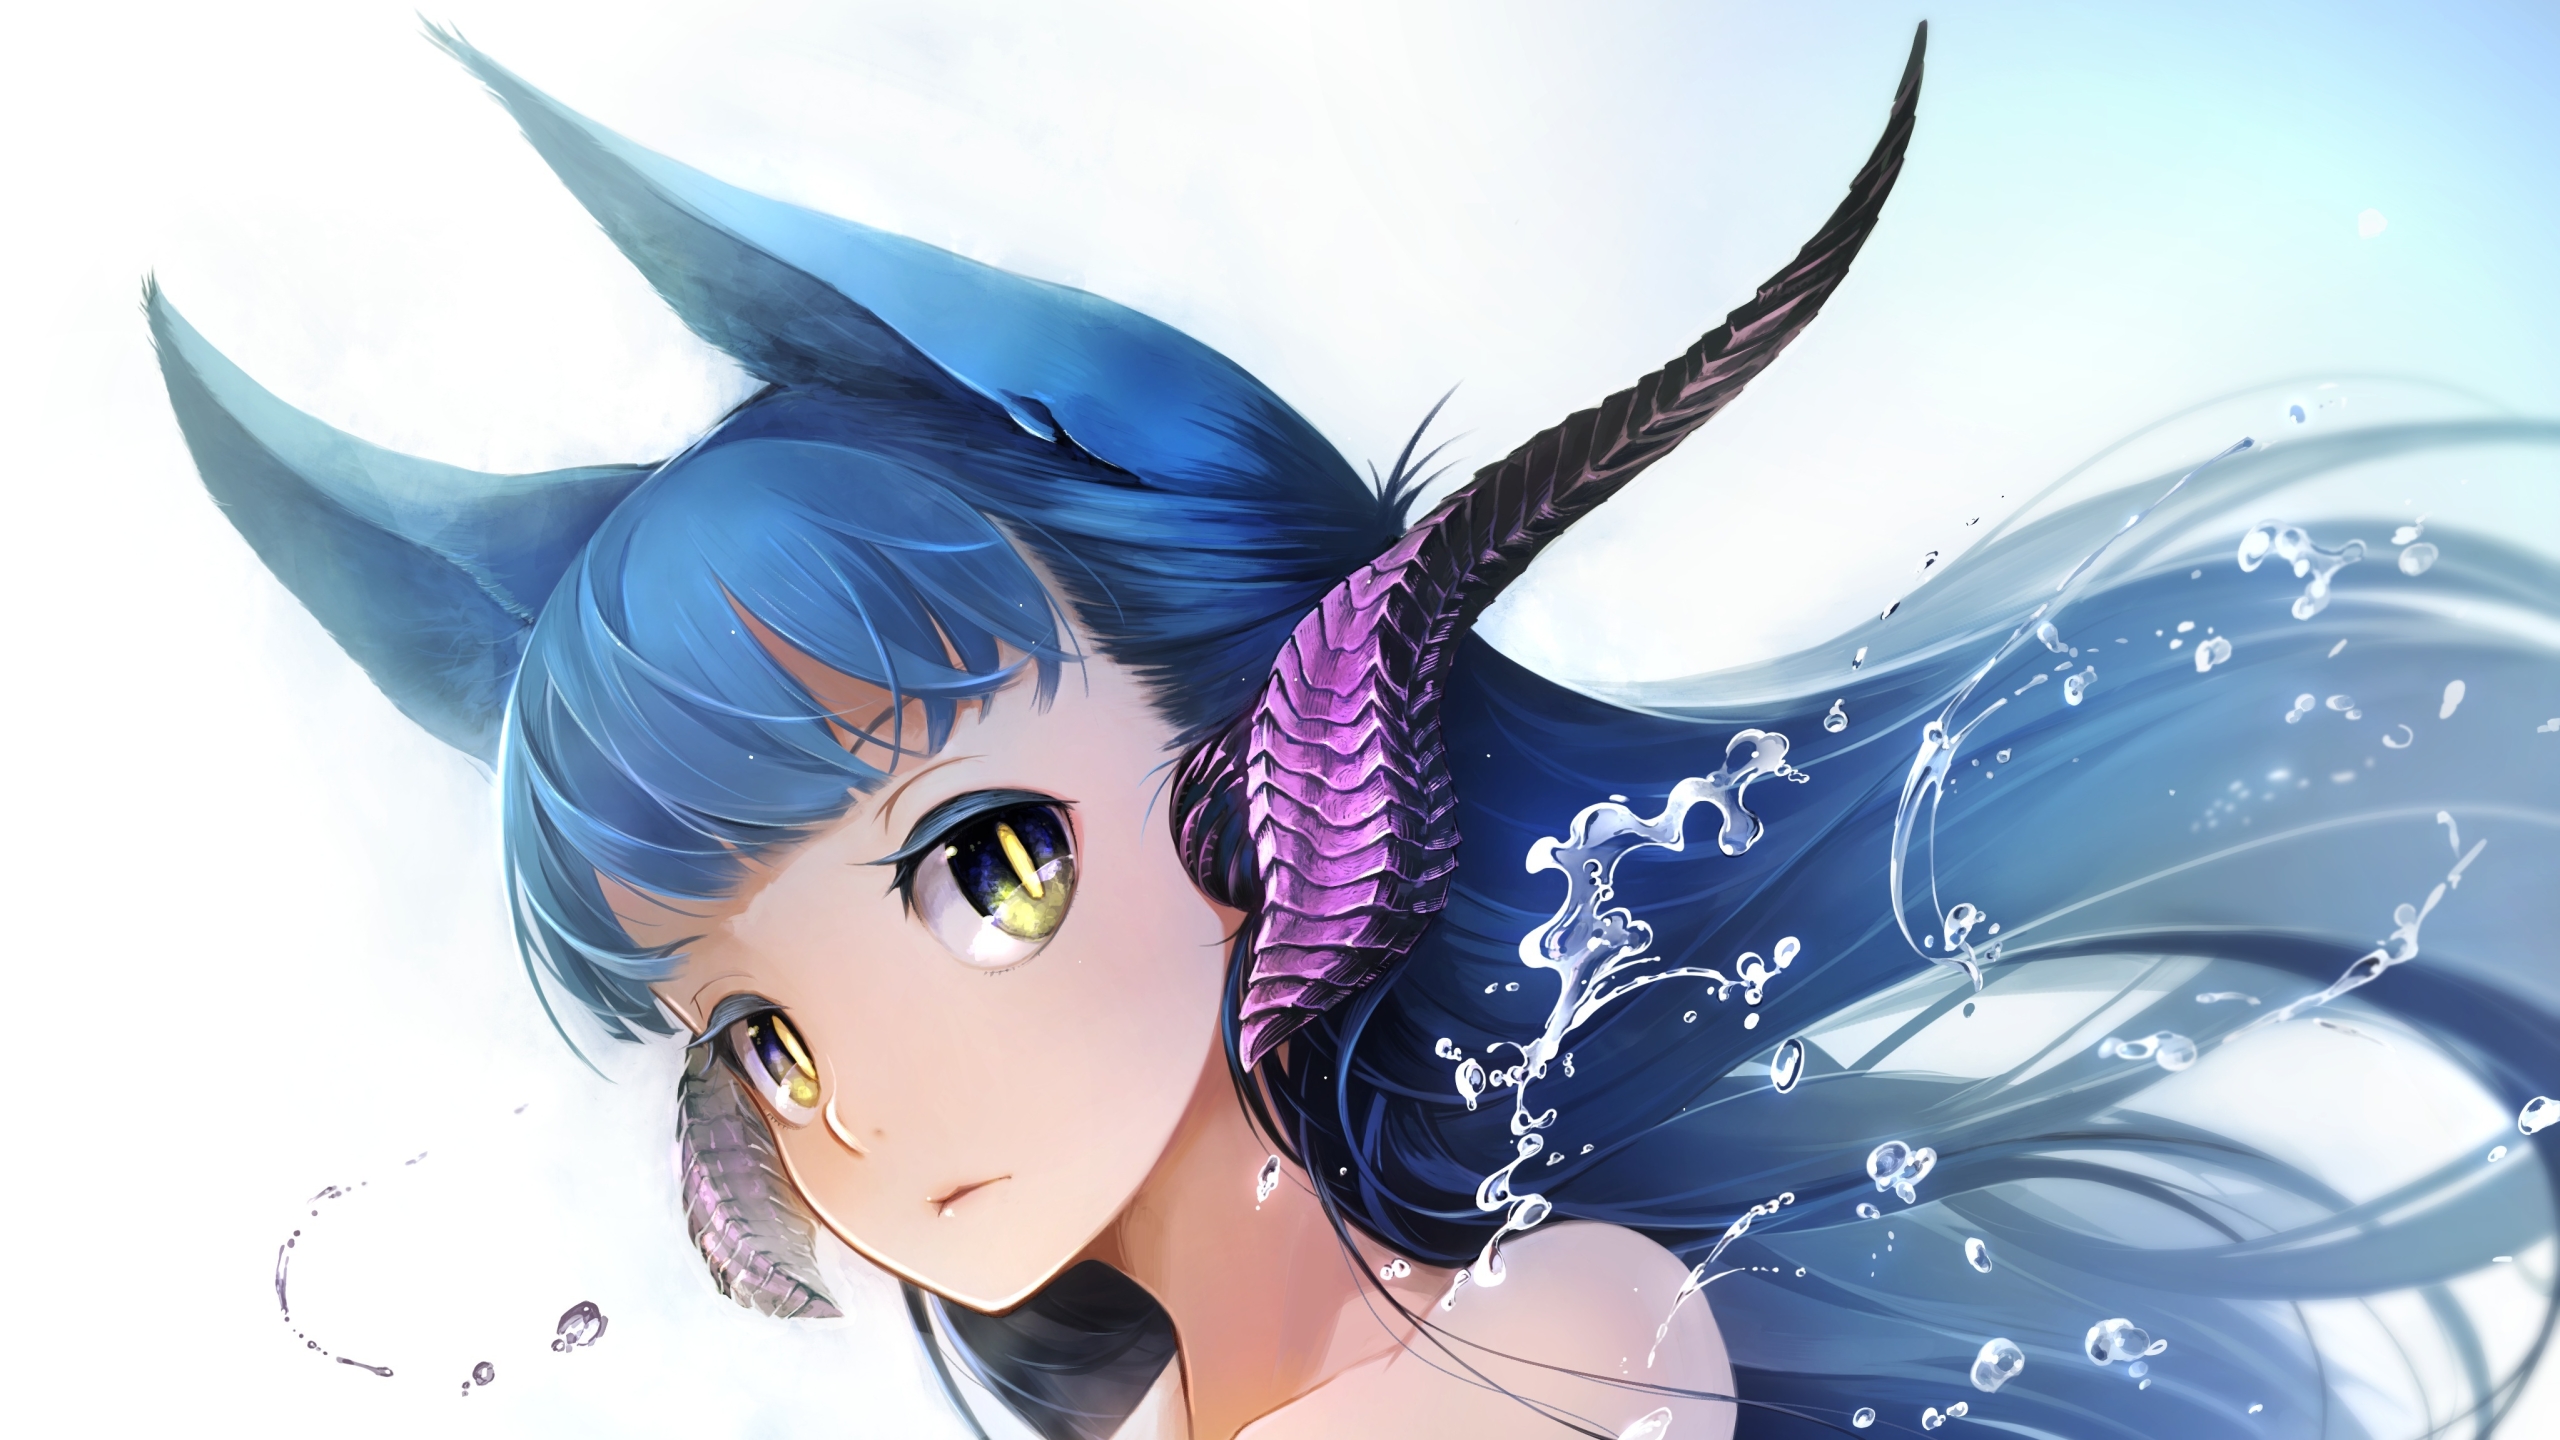 7. Anime girl with curly blue hair and cat ears - wide 5